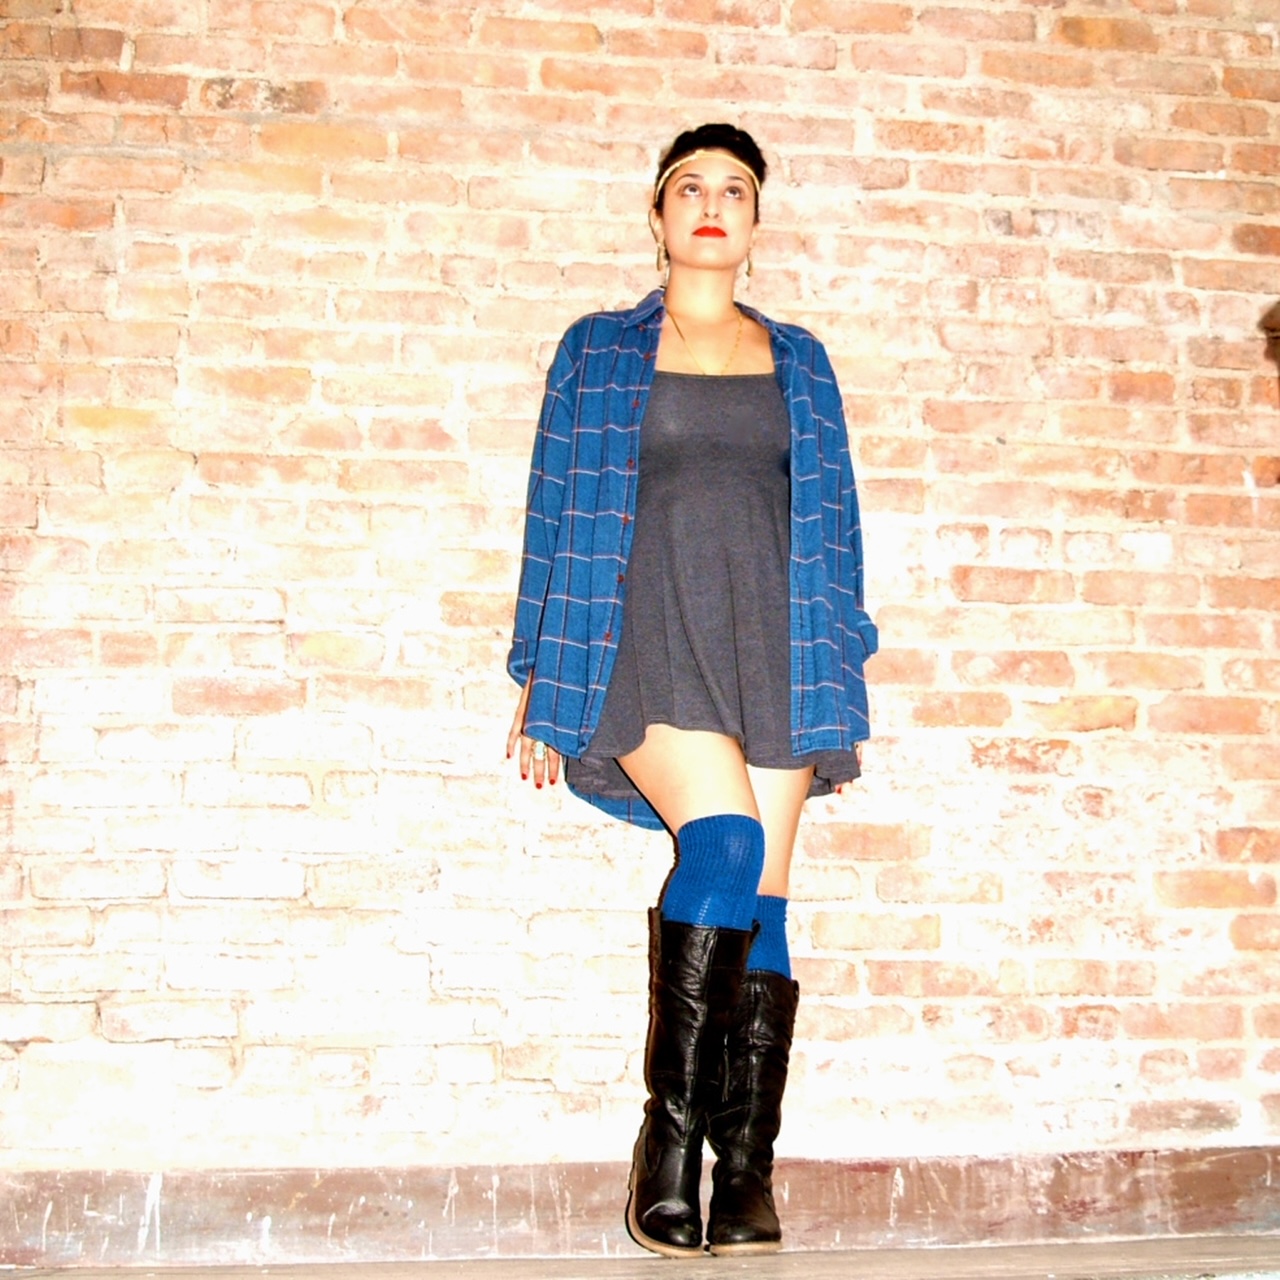 A girl in a casual pose against a brick wall backdrop, wearing a dark gray dress, blue thigh high socks, black leather boots, and a blue checkered shirt with rolled-up sleeves.